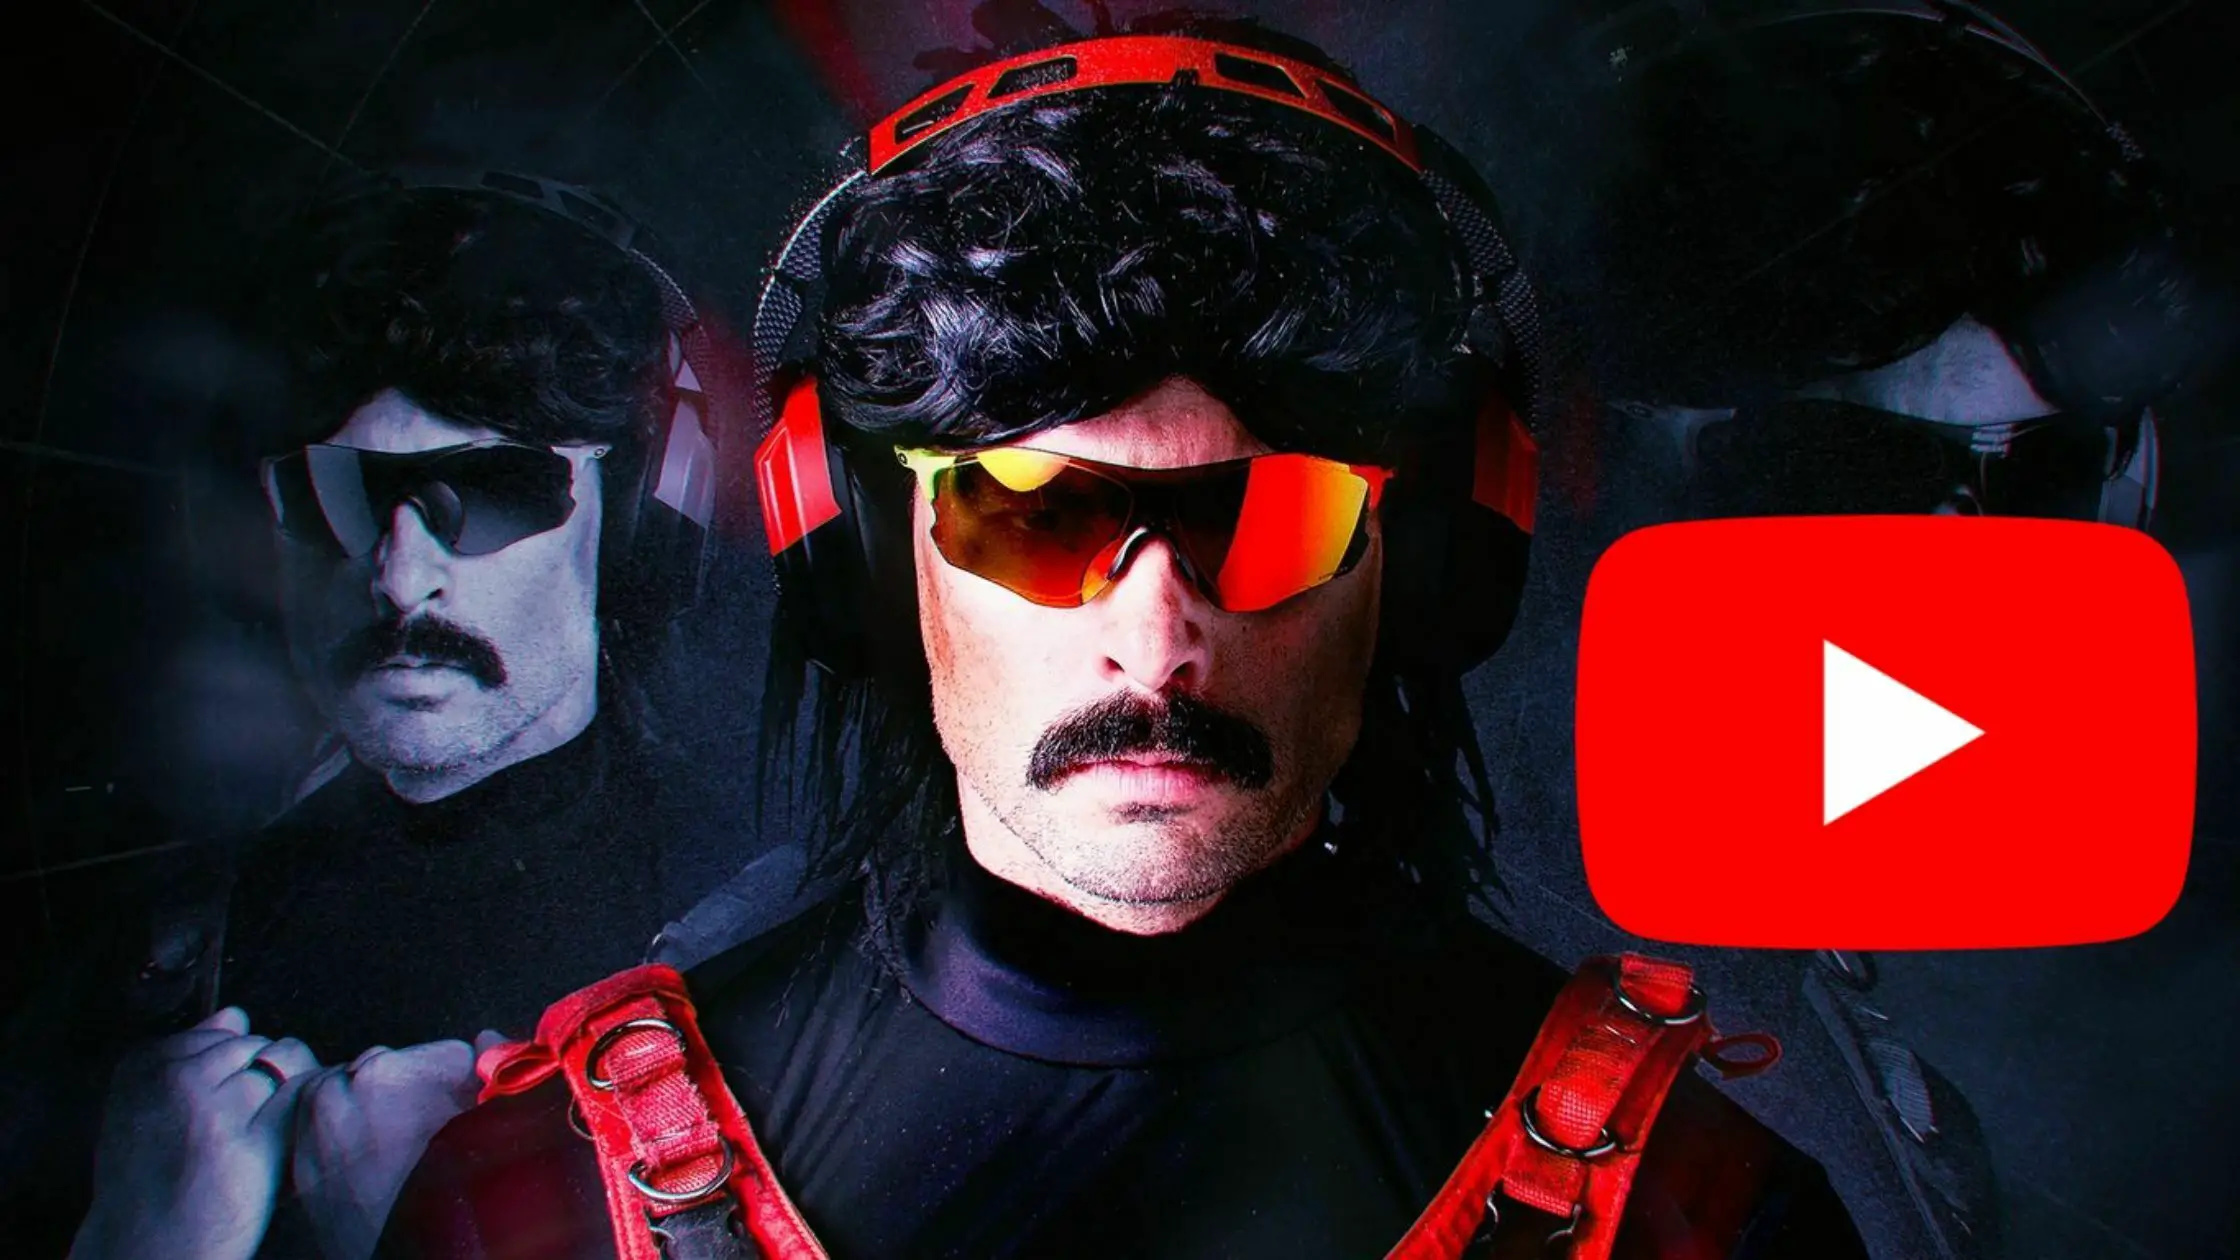 youtube-and-dr-disrespect-to-work-together-and-improve-YouTube